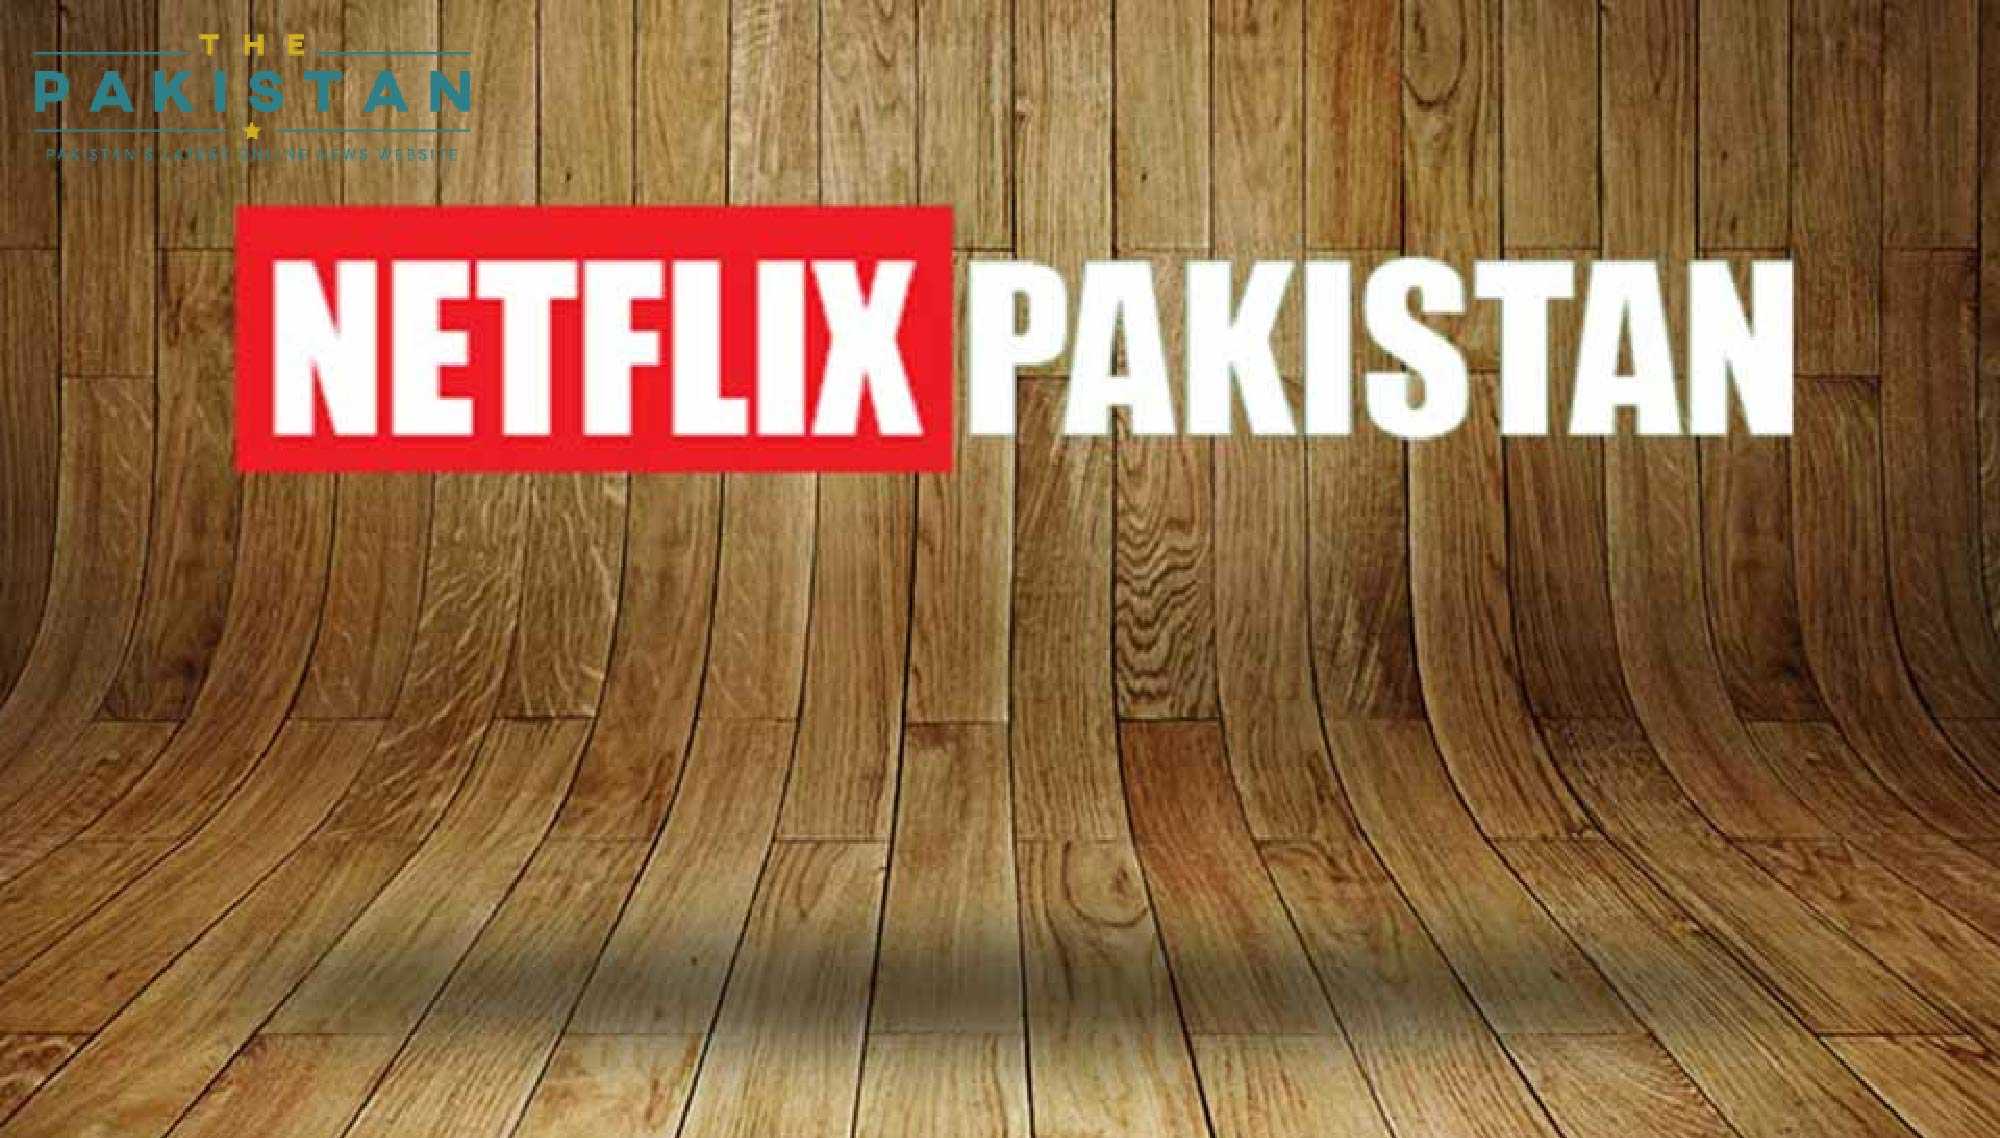 Pakistani version of Netflix to be launched soon